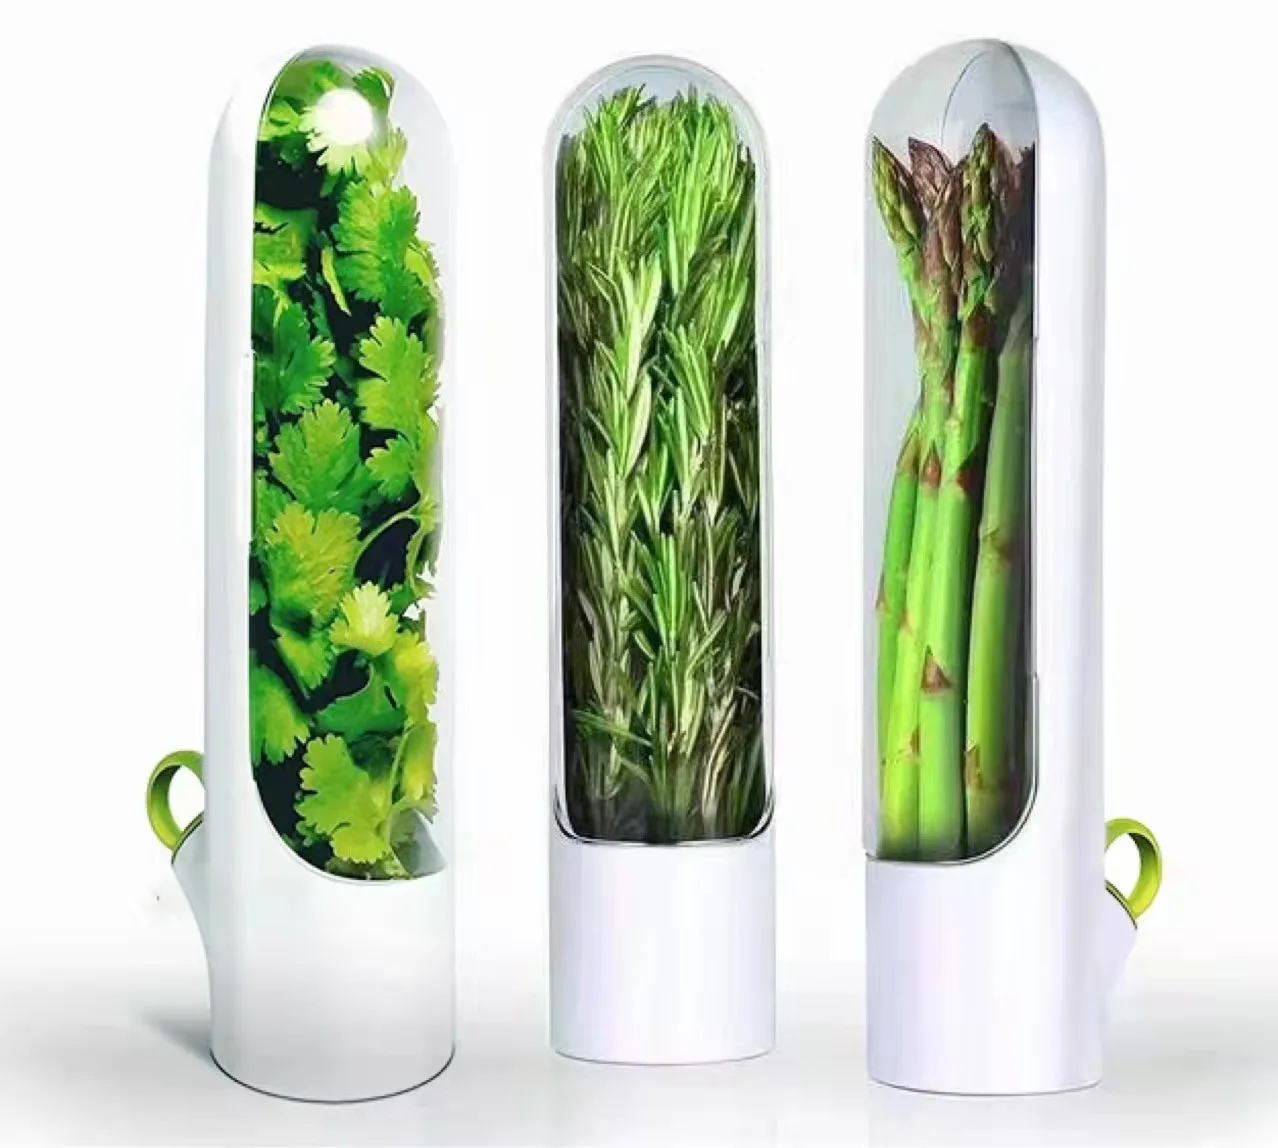 Keeps Greens and Vegetables Fresh For 2X Longer For Kitchen Storage Utensils ZGHYBD Vanilla Fresh-Keeping Cup Herb Storage Container 501-800ml 